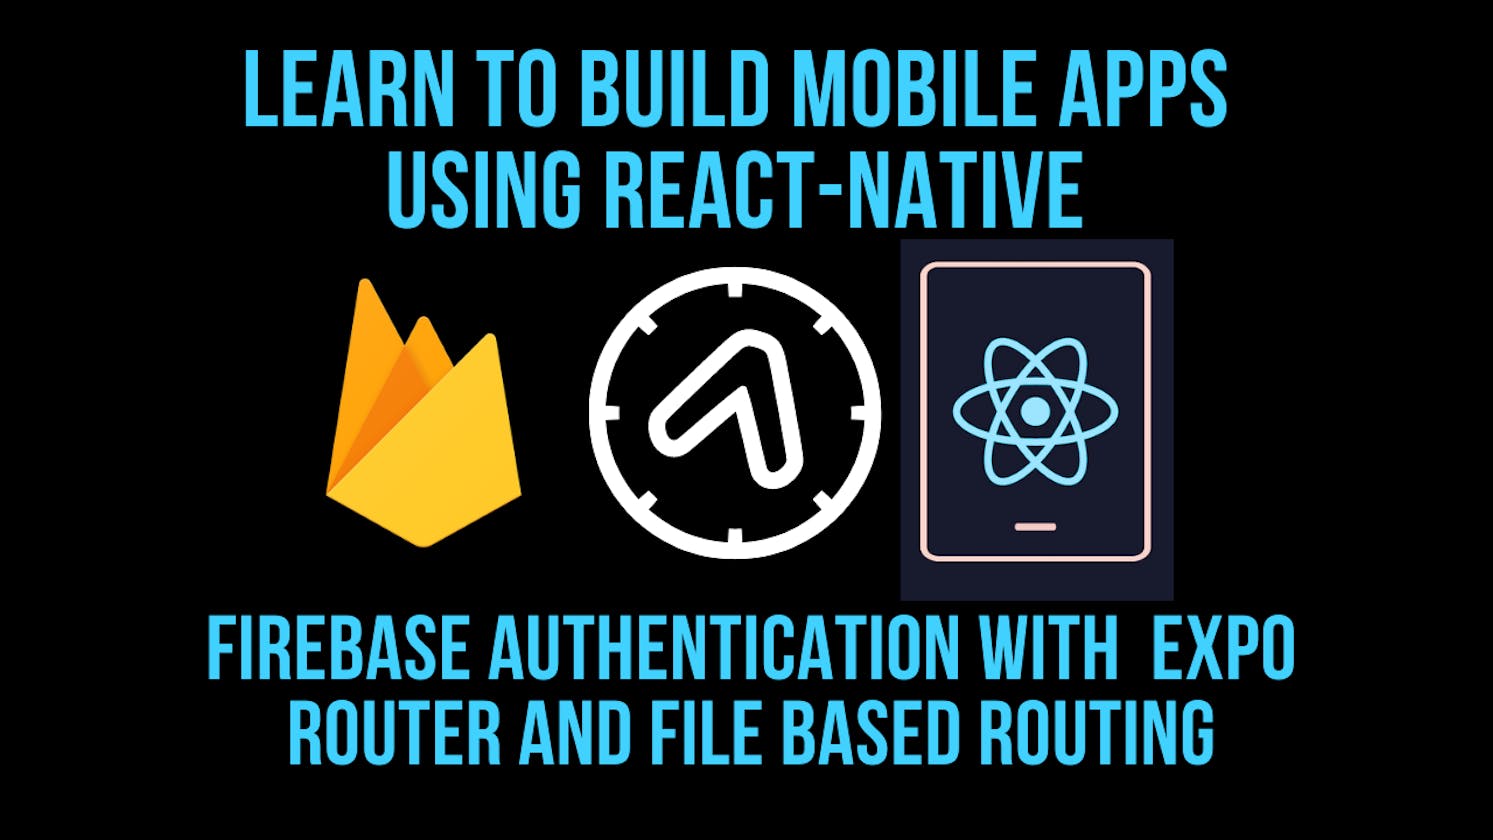 ReactNative Expo File Based Routing with Firebase Authentication